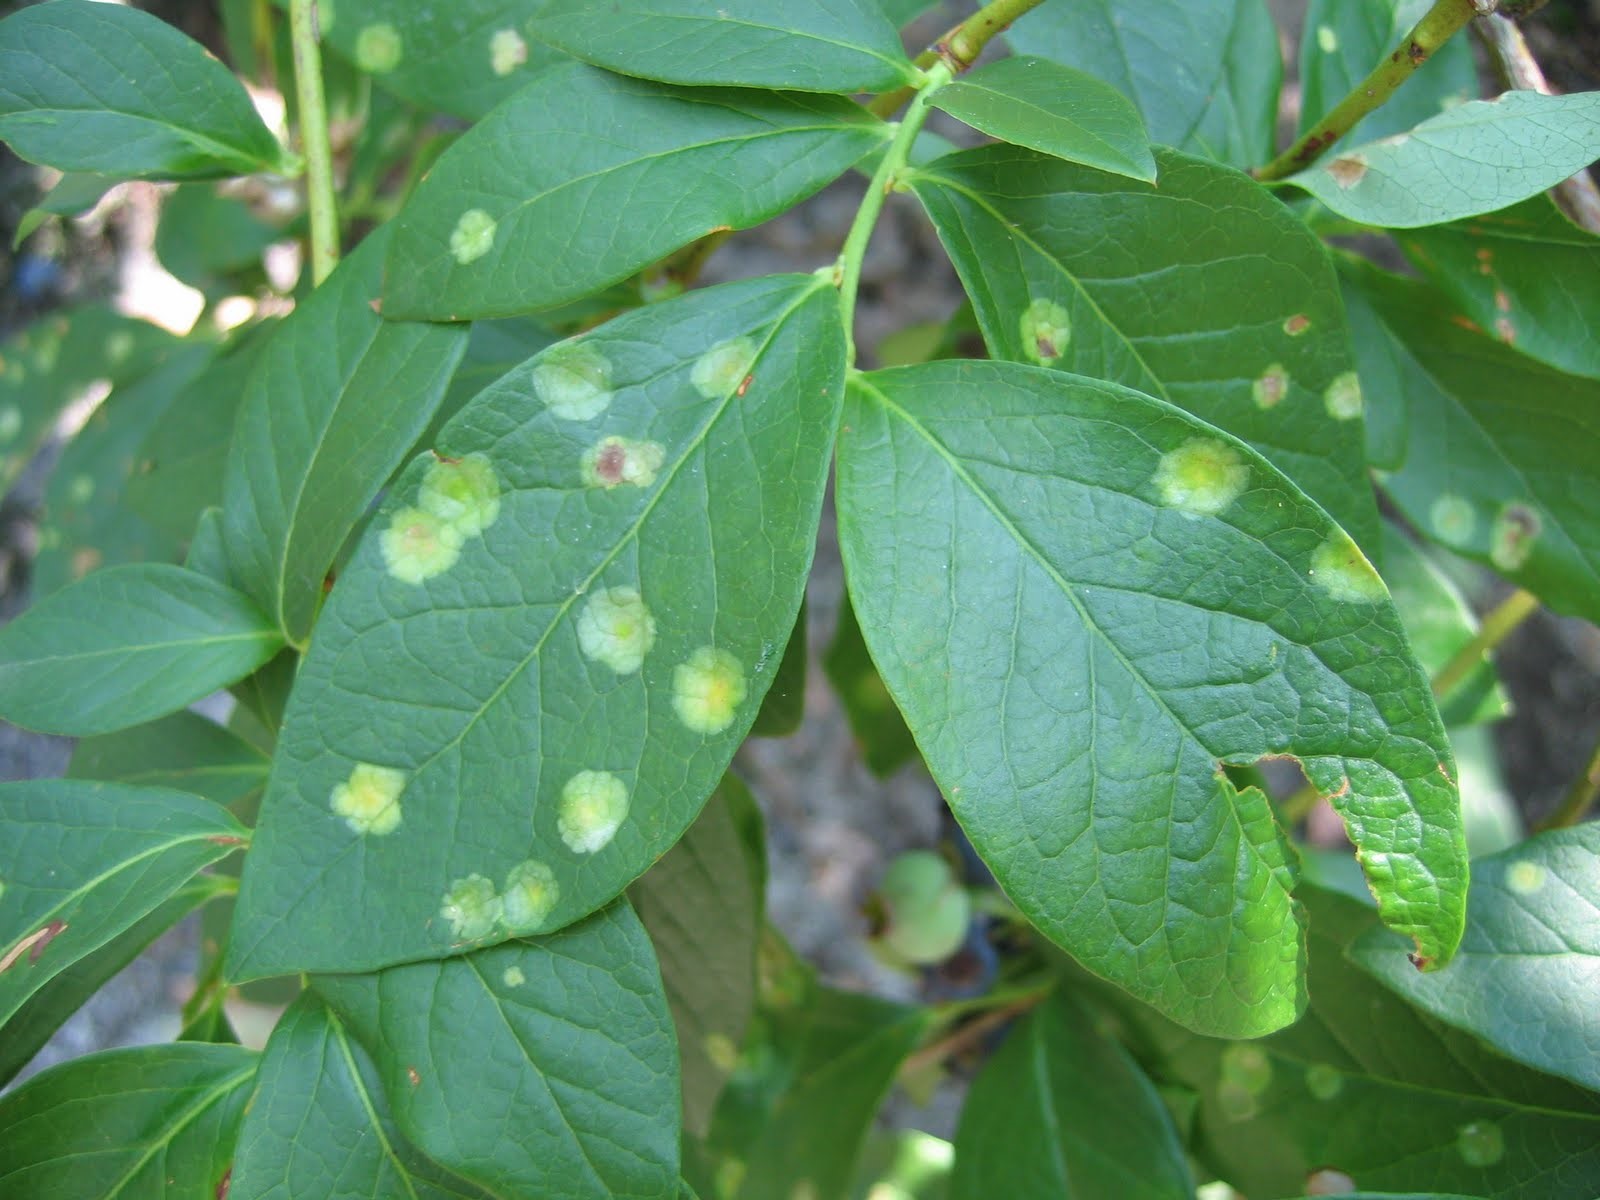 Close up of blueberry leaves with large white spots covering the leaves